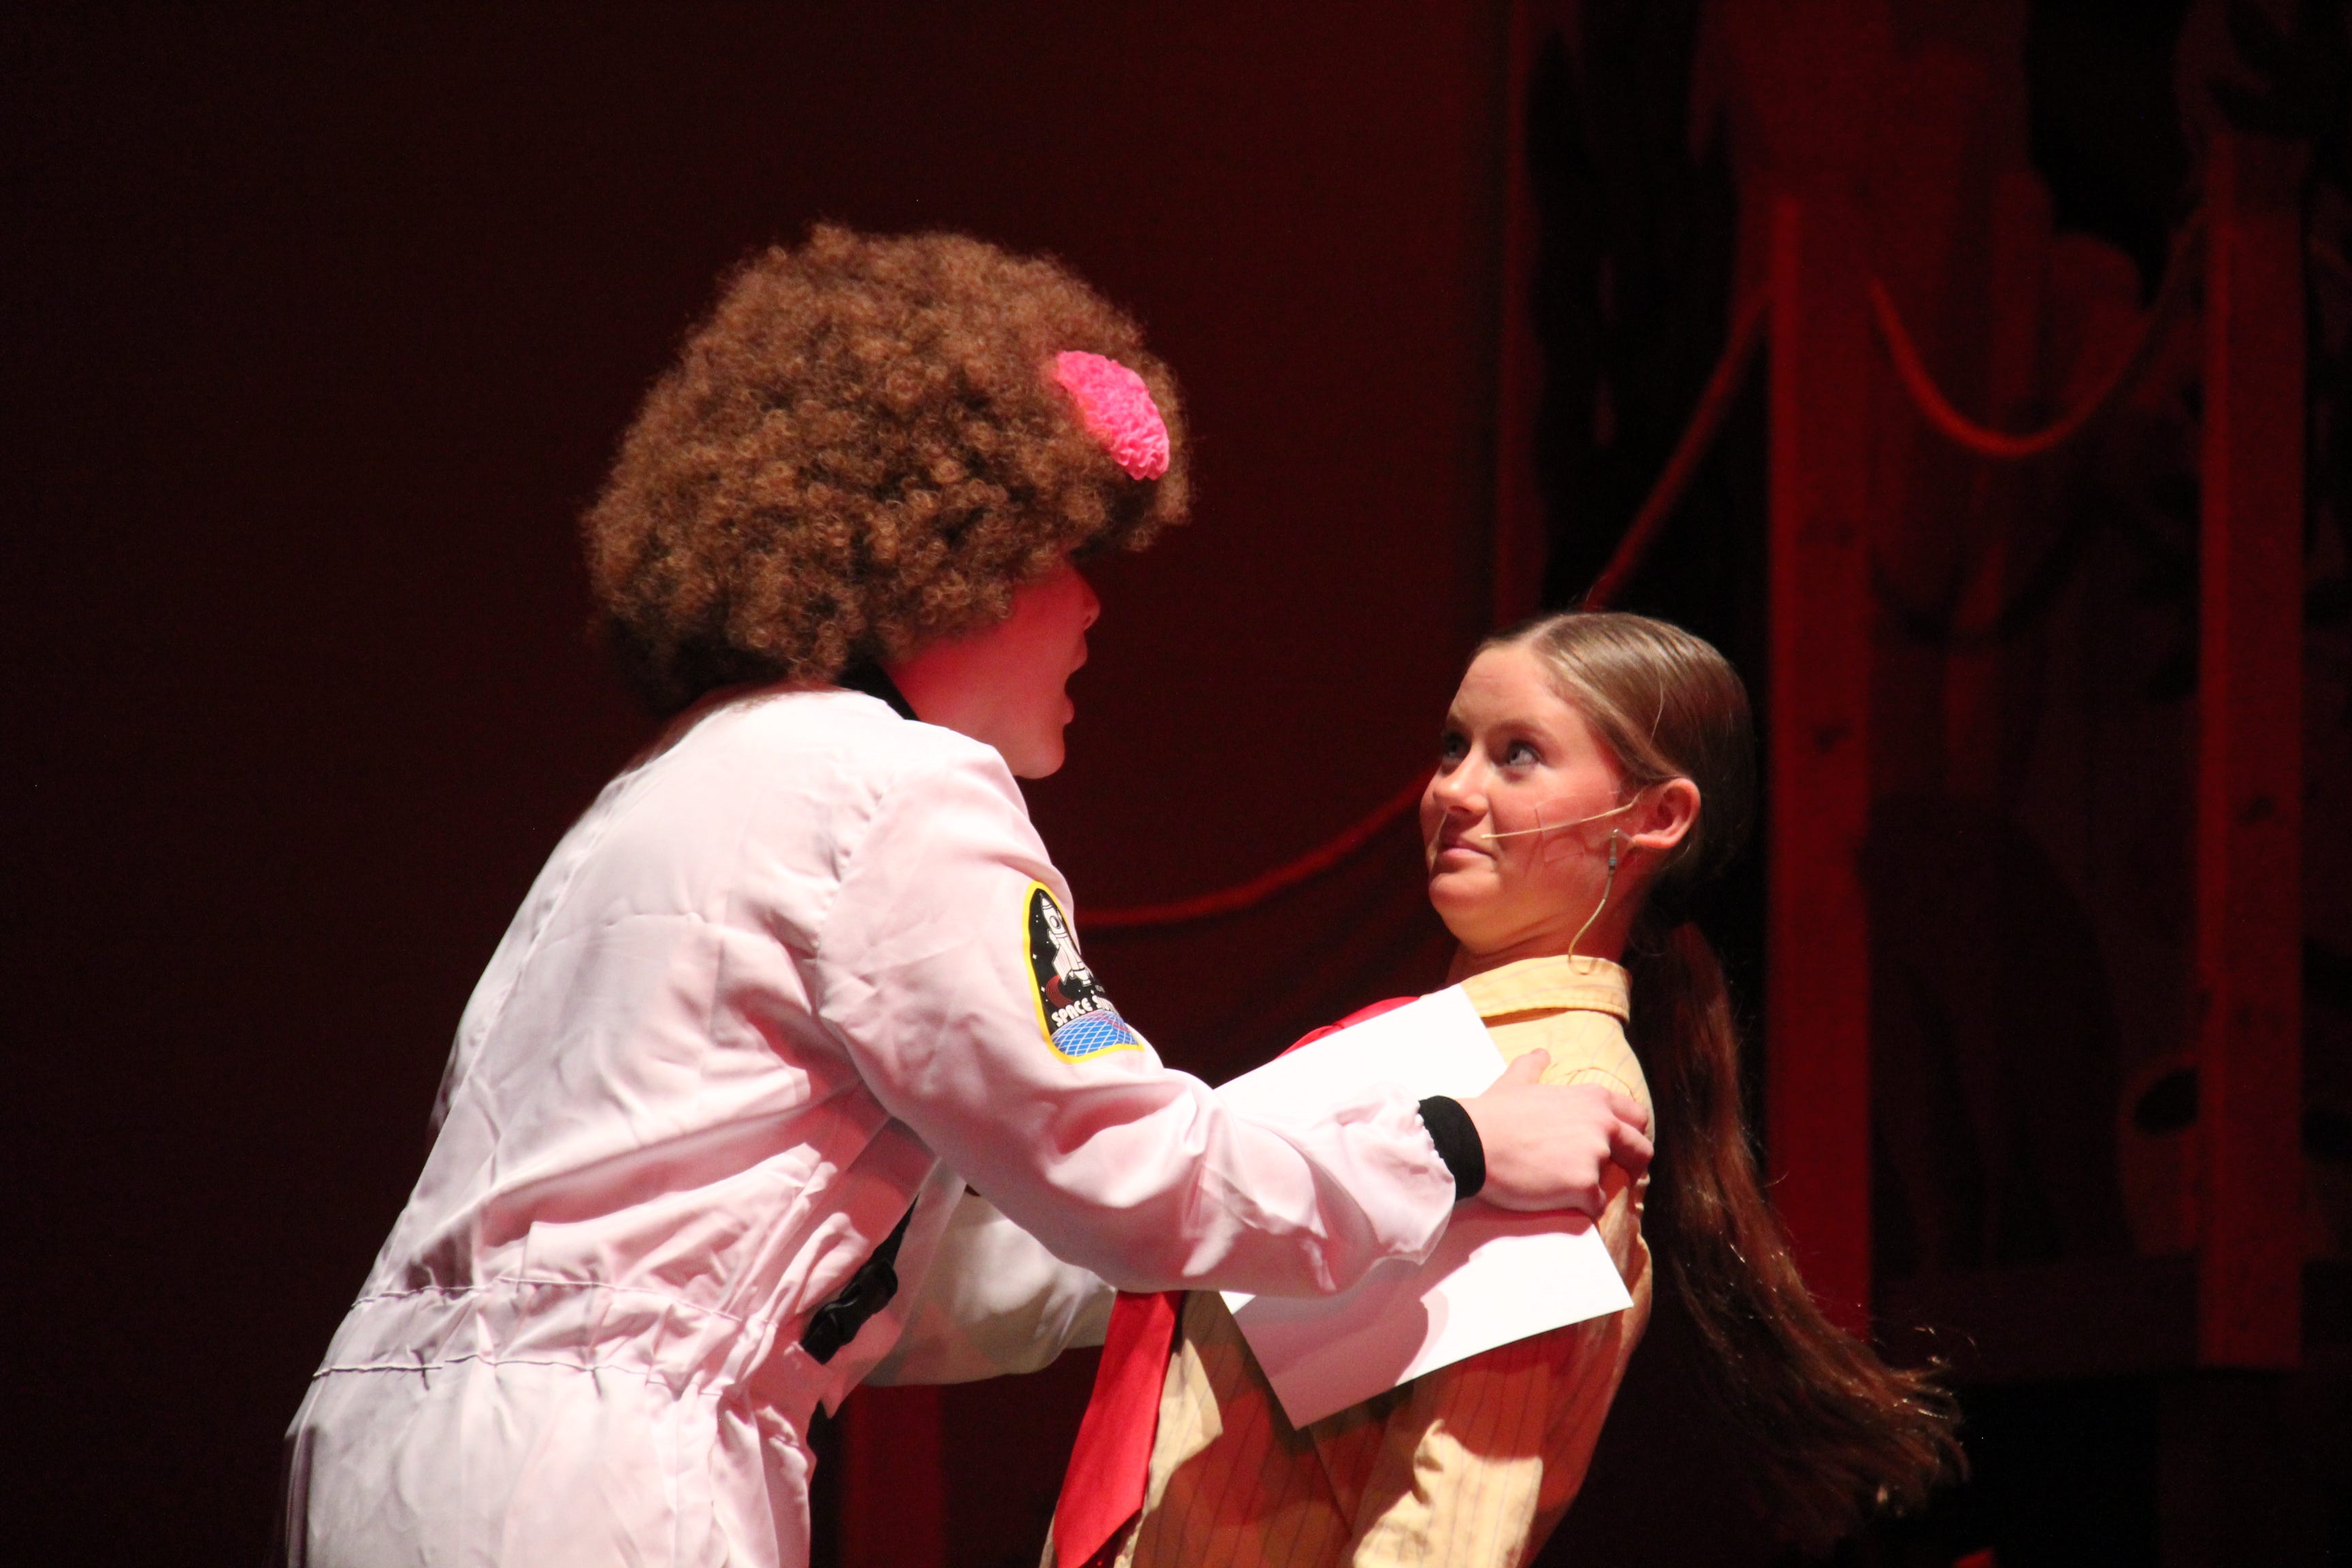 Maddy Hollingsworth and Alexa Nelson perform a scene from “The SpongeBob Musical.”